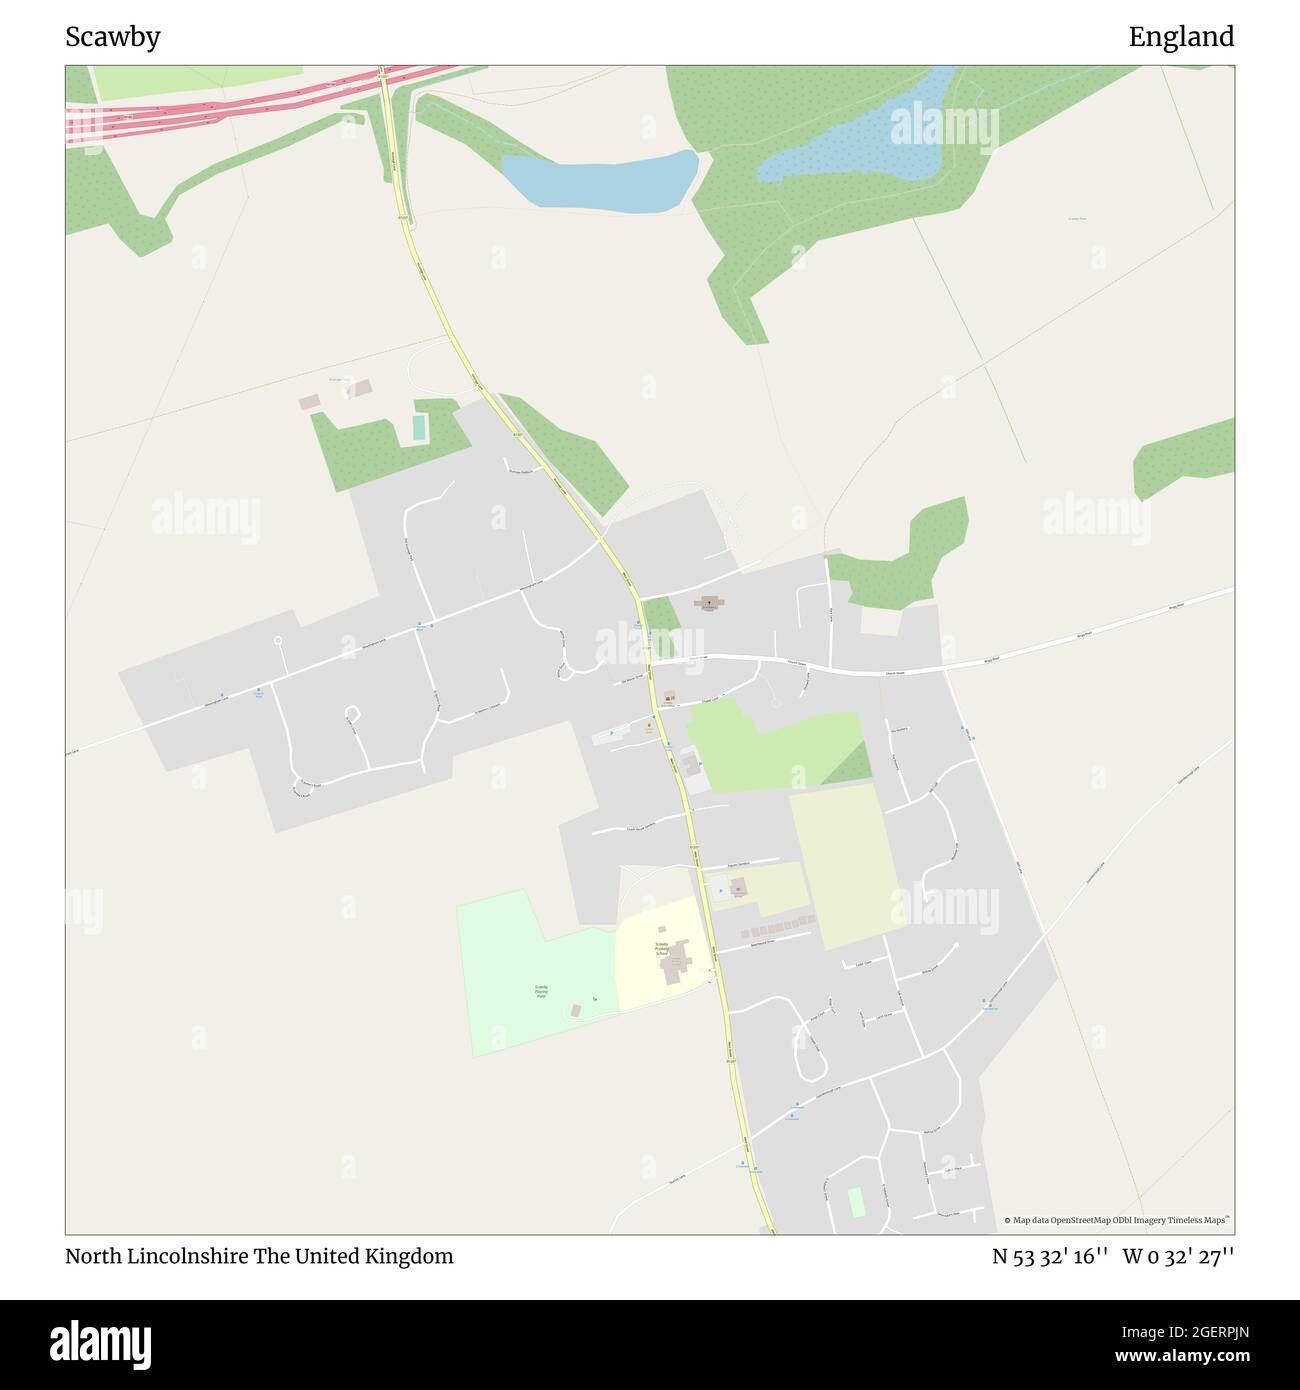 Scawby, North Lincolnshire, United Kingdom, England, N 53 32' 16'', W 0 32' 27'', map, Timeless Map published in 2021. Travelers, explorers and adventurers like Florence Nightingale, David Livingstone, Ernest Shackleton, Lewis and Clark and Sherlock Holmes relied on maps to plan travels to the world's most remote corners, Timeless Maps is mapping most locations on the globe, showing the achievement of great dreams Stock Photo